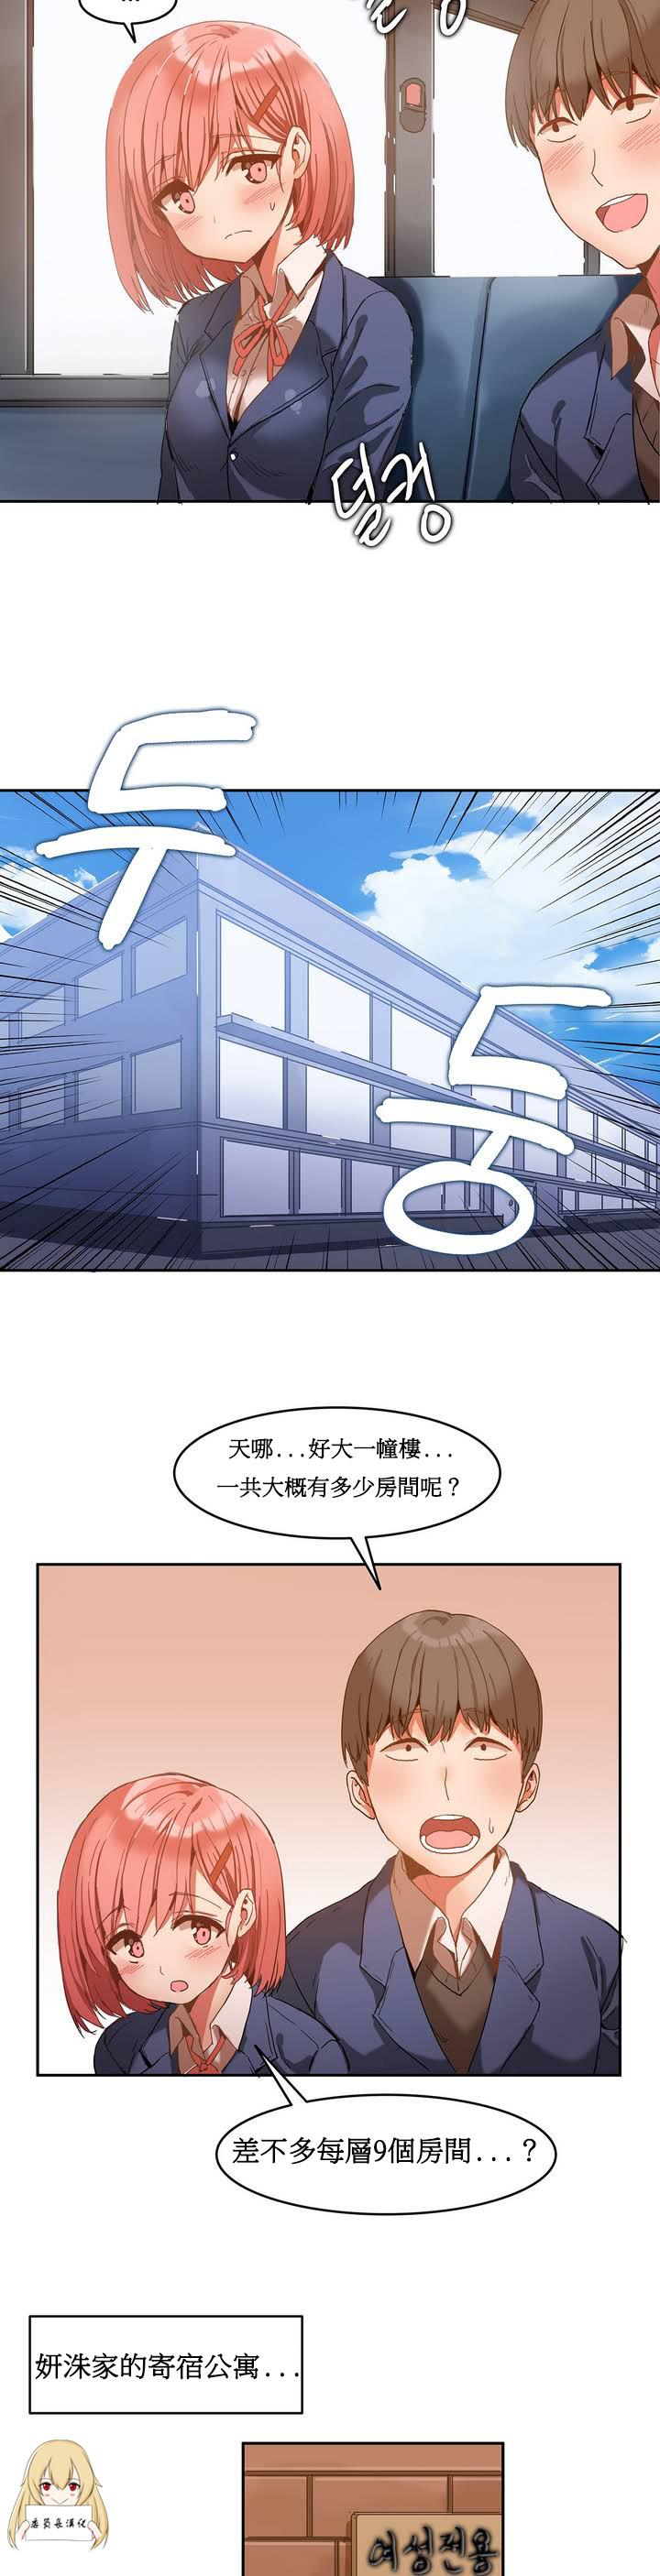 Perverted Hahri's Lumpy Boardhouse Ch. 1~12【委員長個人漢化】（持續更新） Desperate - Page 11